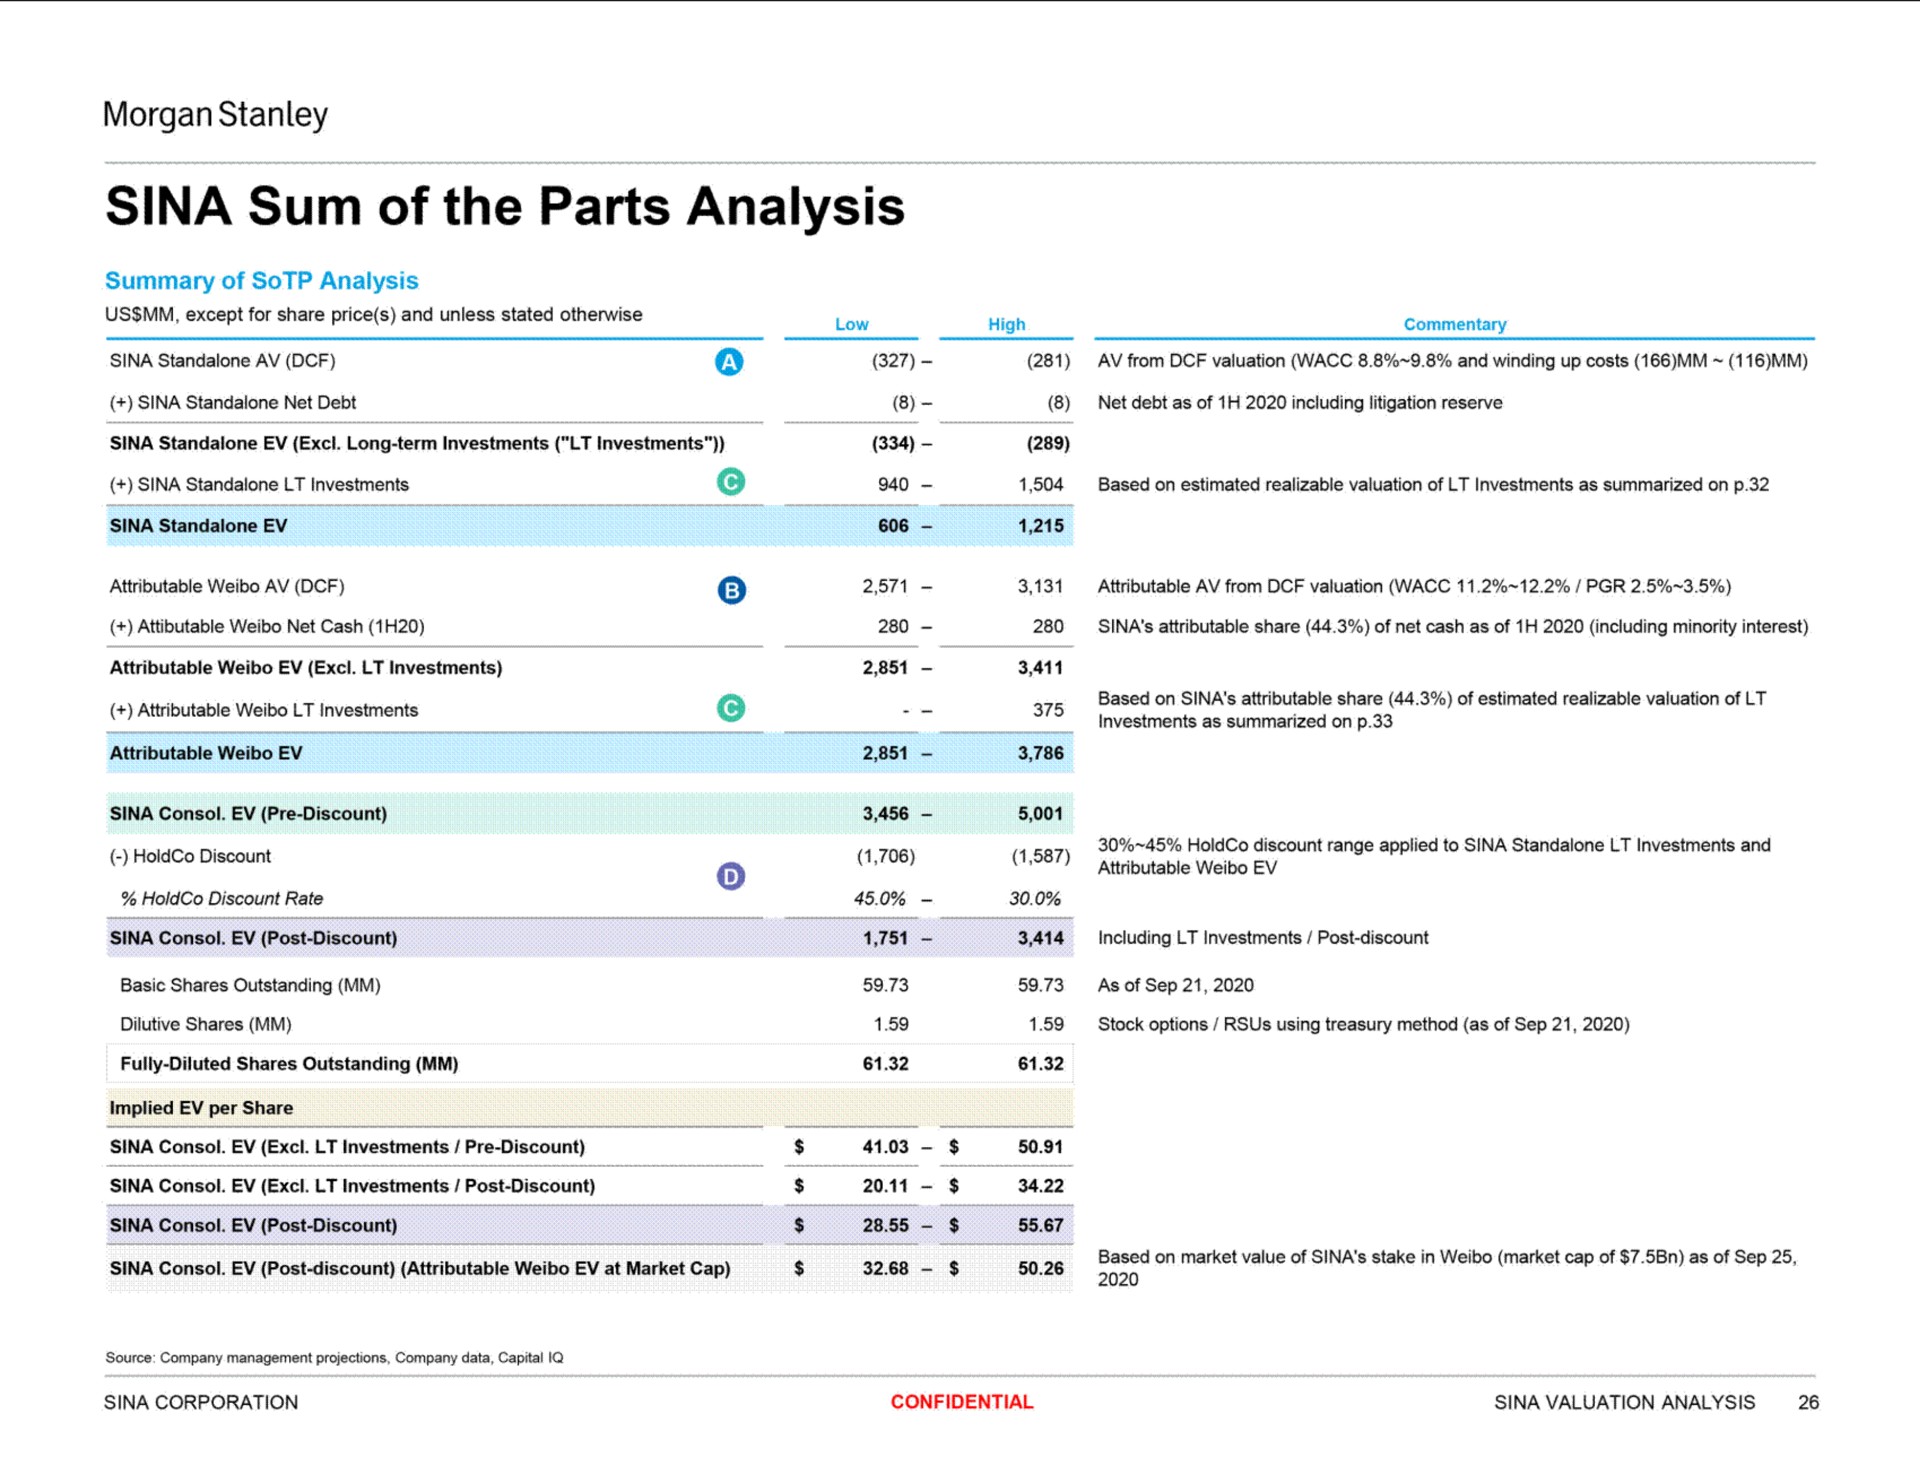 sina sum of the parts analysis | Morgan Stanley